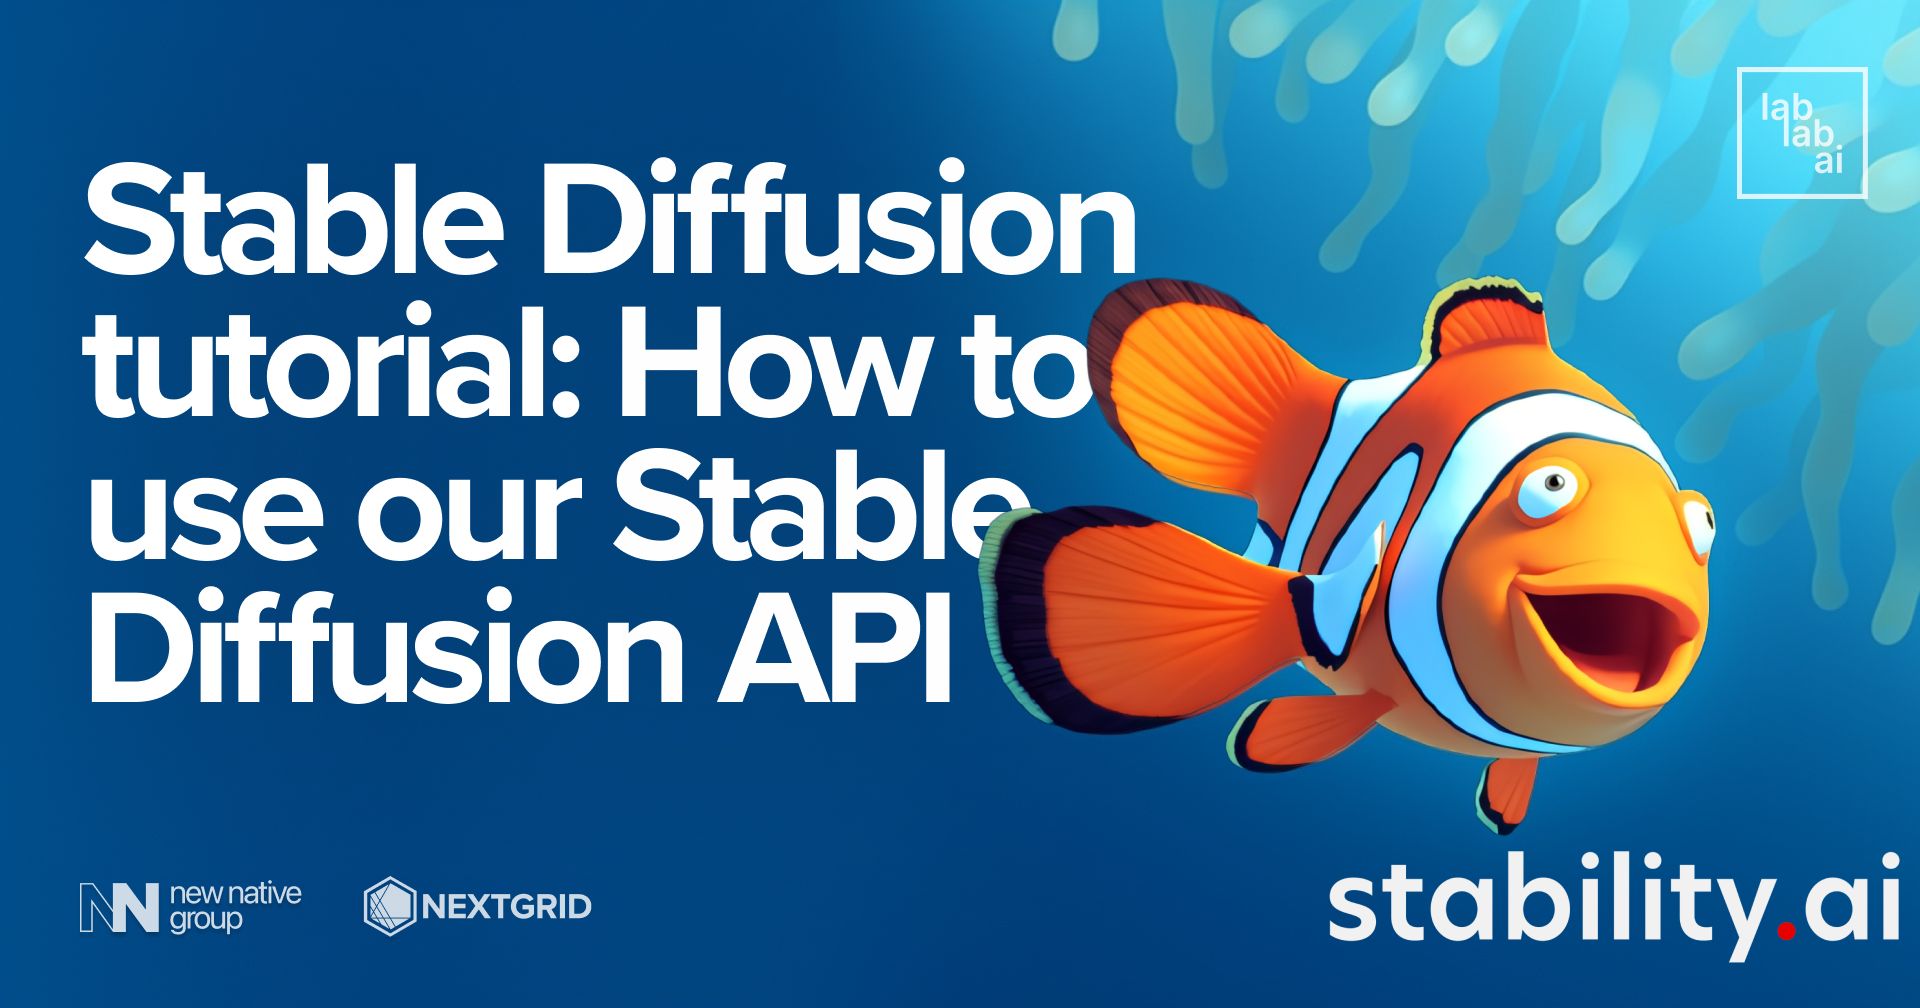 Stable Diffusion tutorial: How to use our Stable Diffusion API